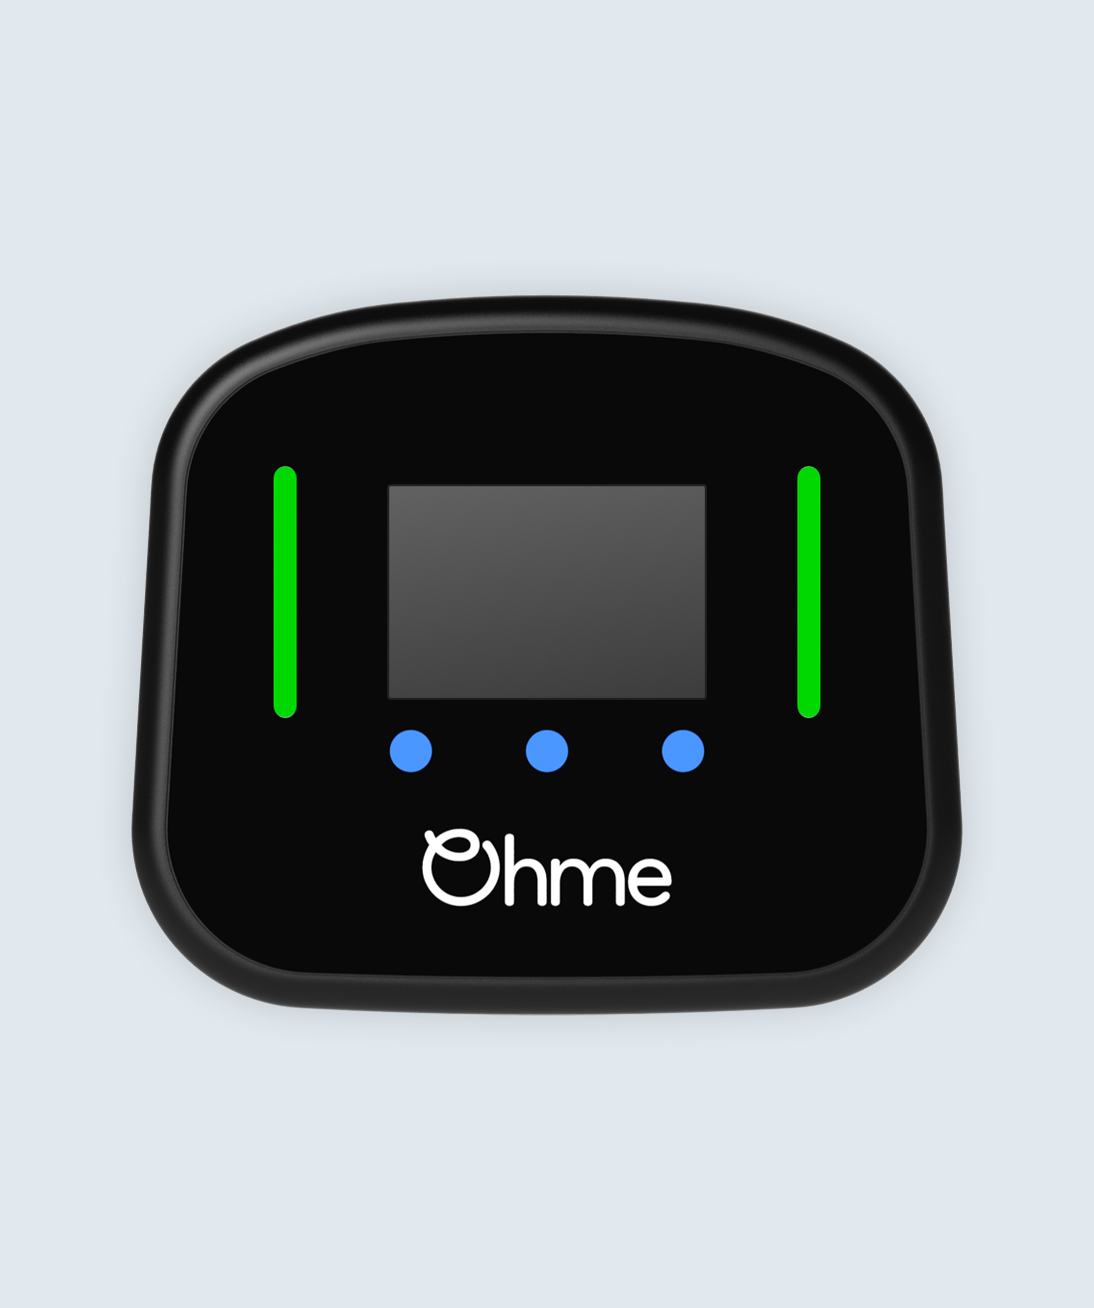 Ohme home pro with green lights illuminated